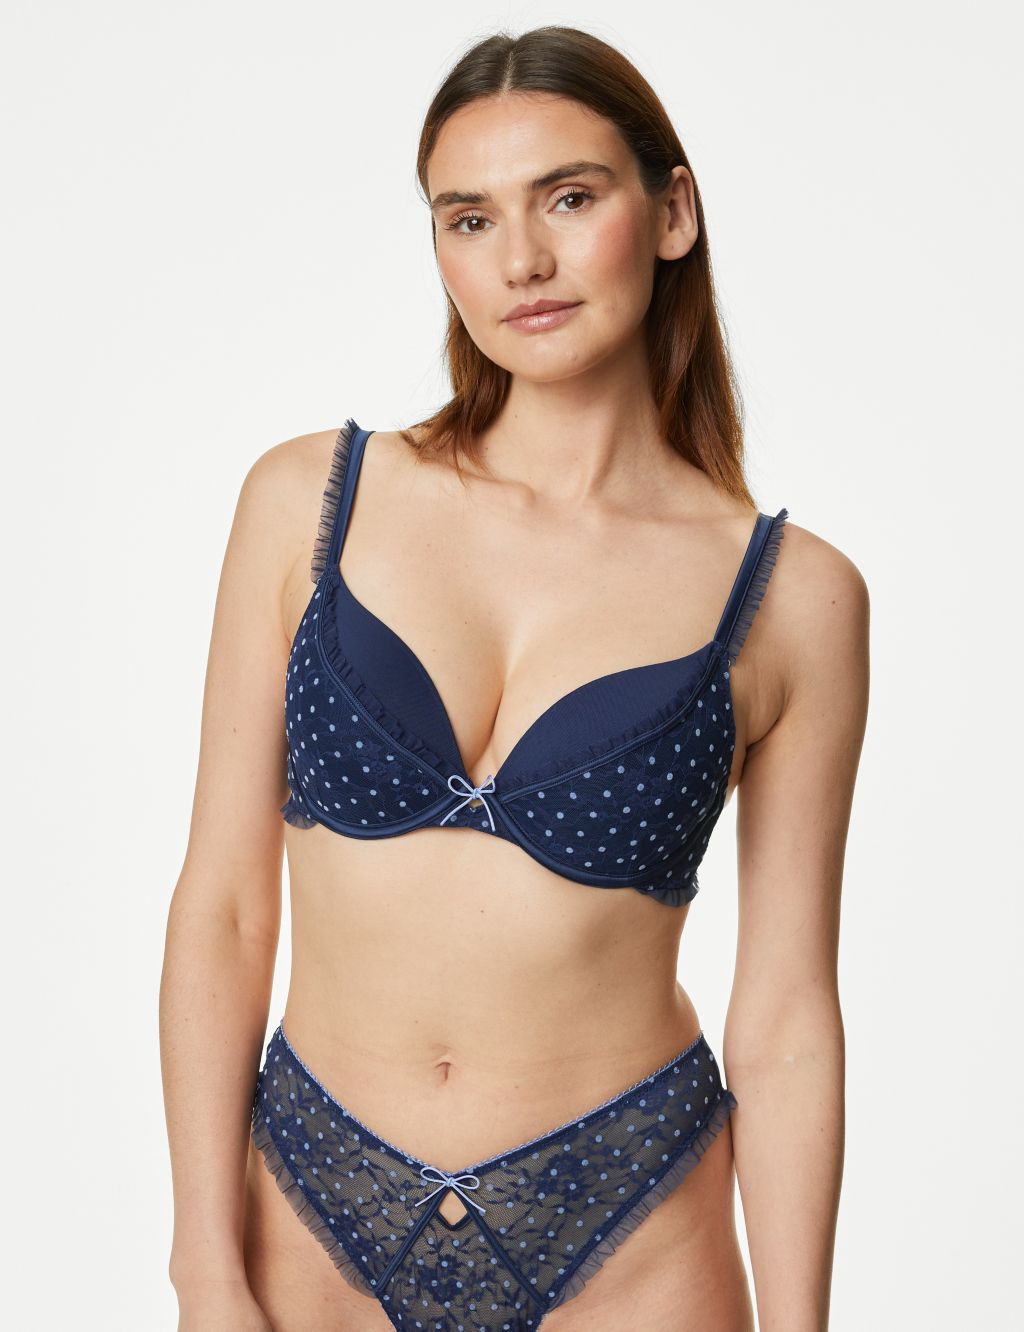 Anna Lace Wired Push-Up Bra image 1